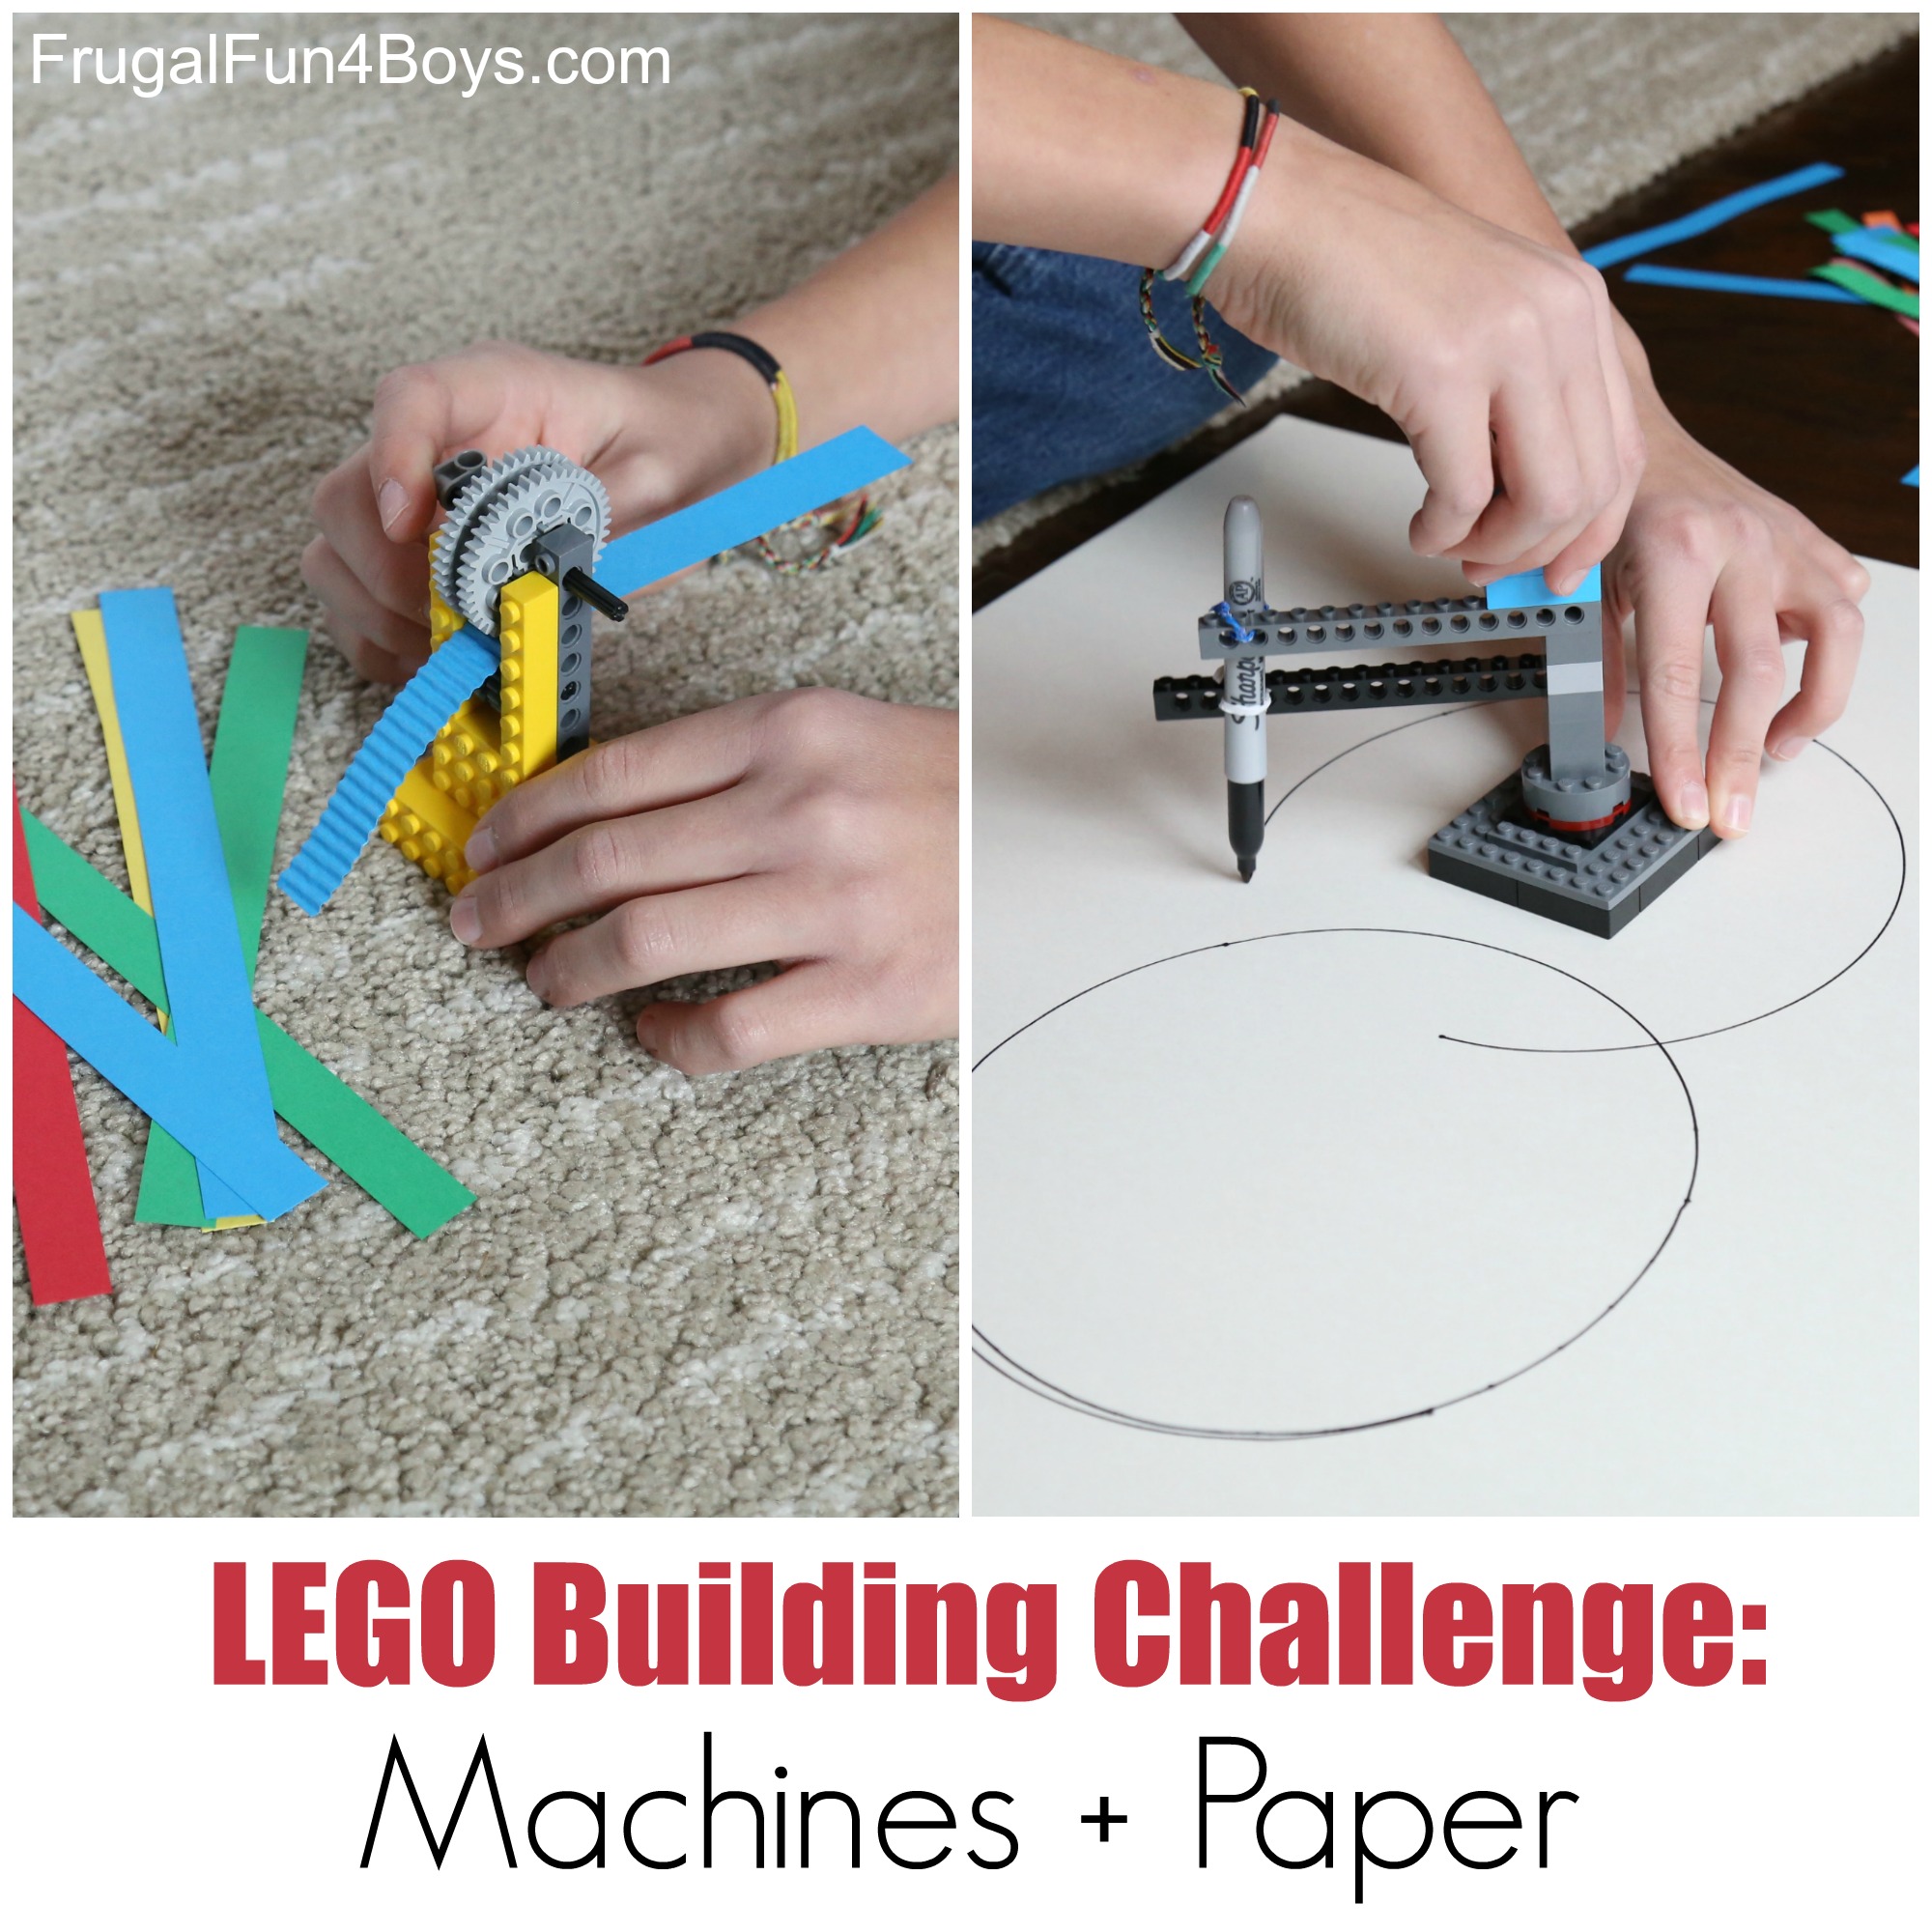 LEGO Building Challenge: Machines + Paper! Build a paper crimper and a circle drawing machine.